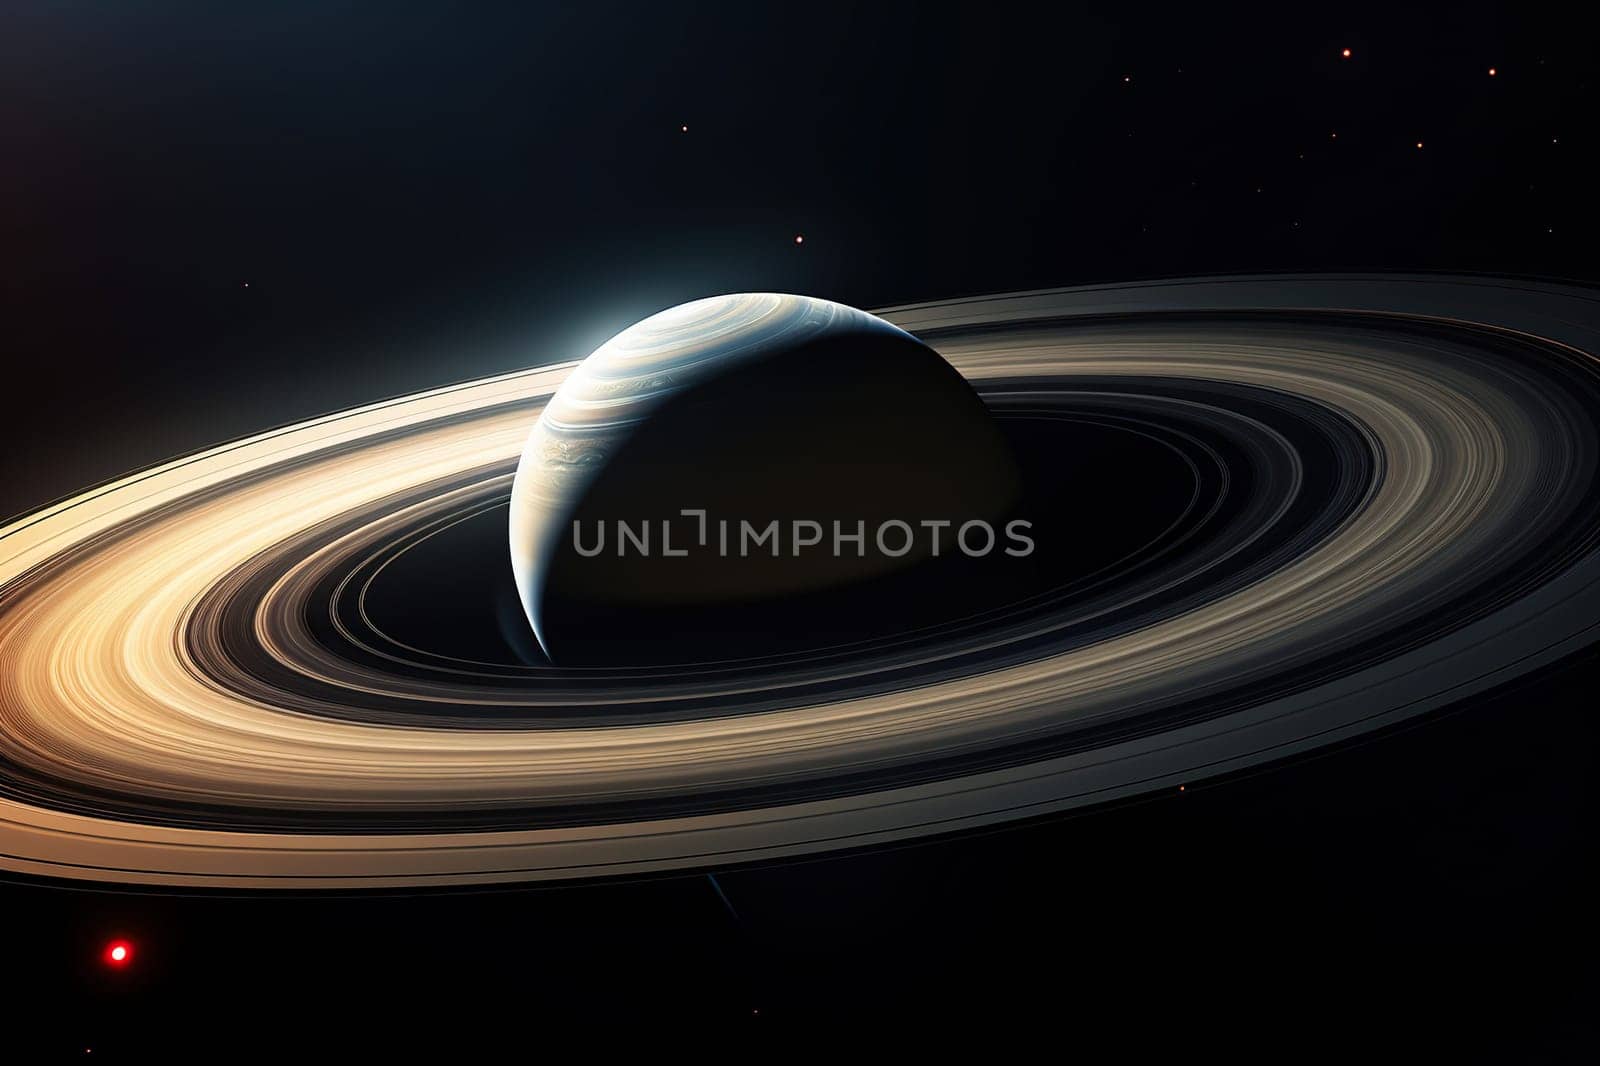 Image of a planet with rings in space. Planet Saturn.